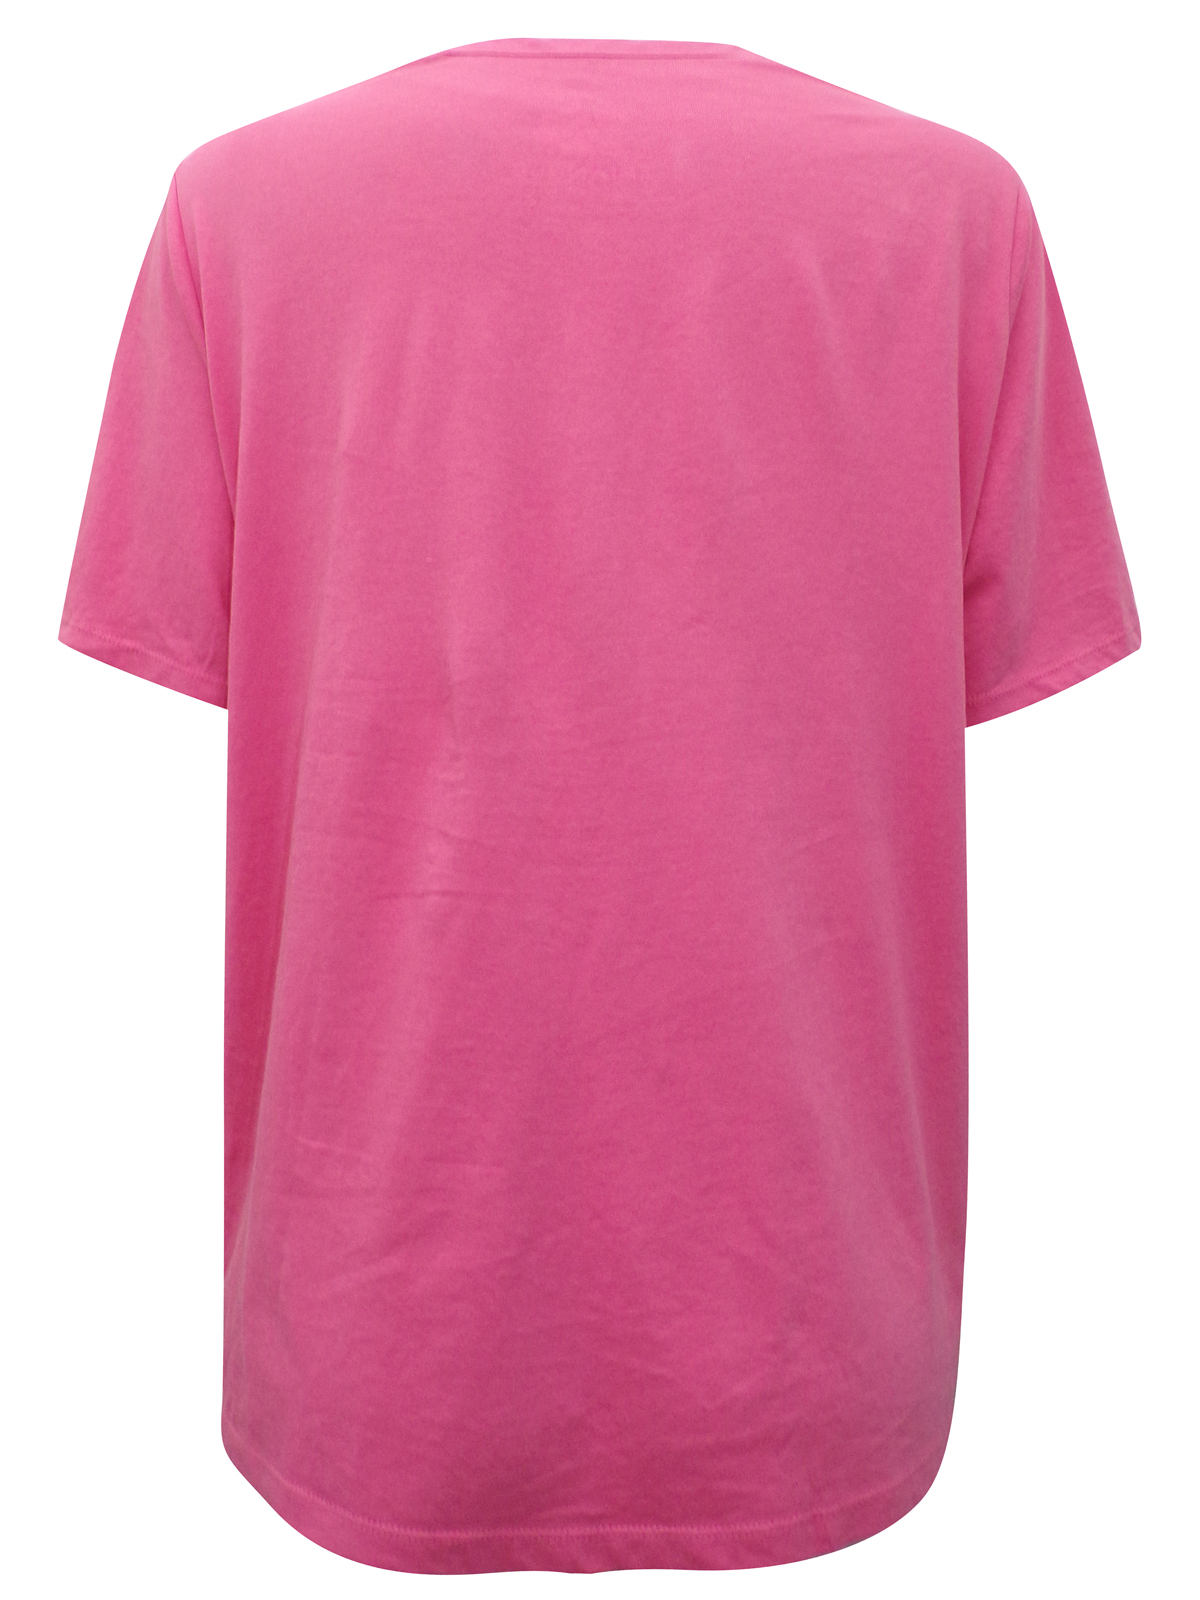 S.Oliver - Triangle - - S.Oliver Triangle PINK Pure Cotton Pintuck ...